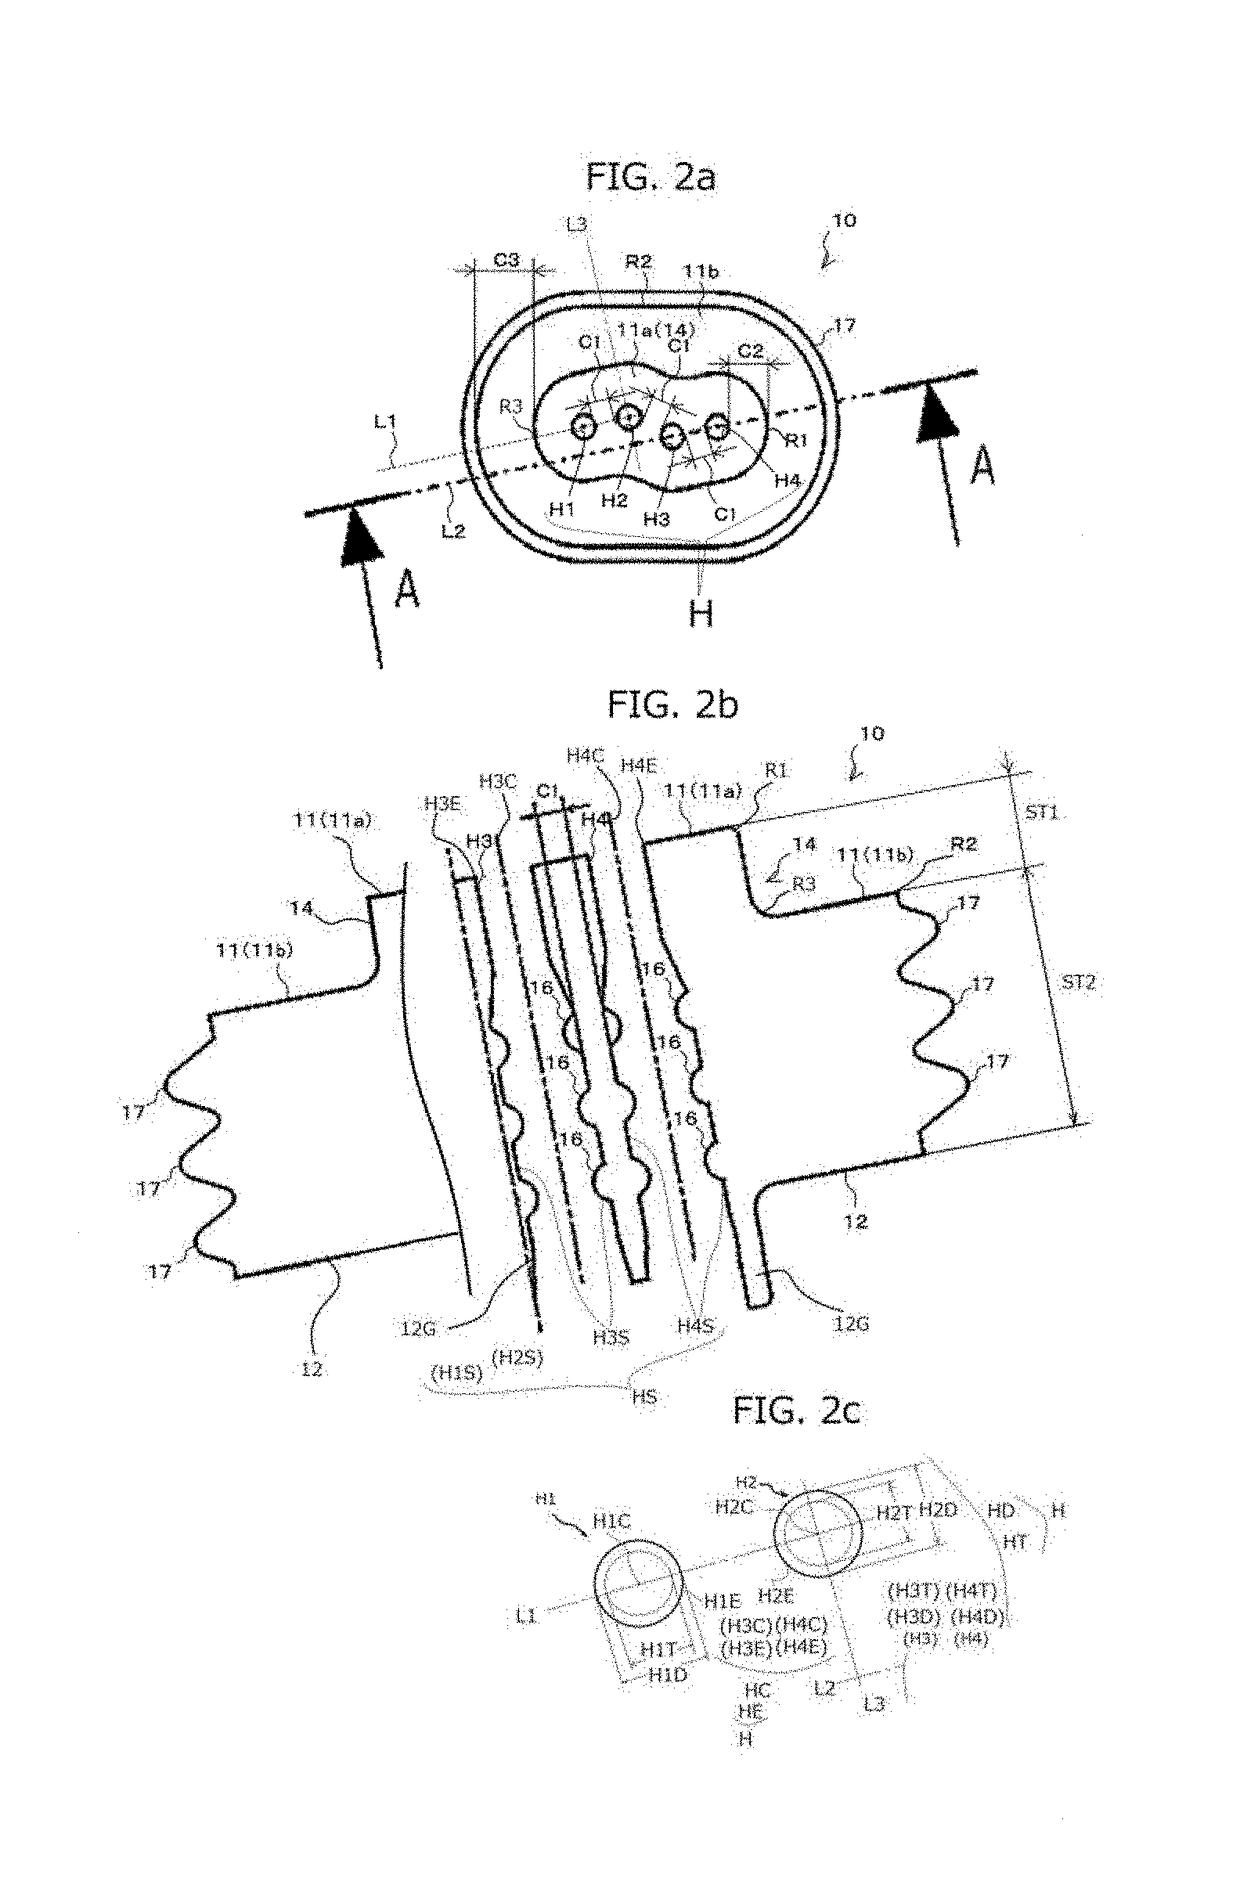 Wiring grommet and vehicular harness using the same